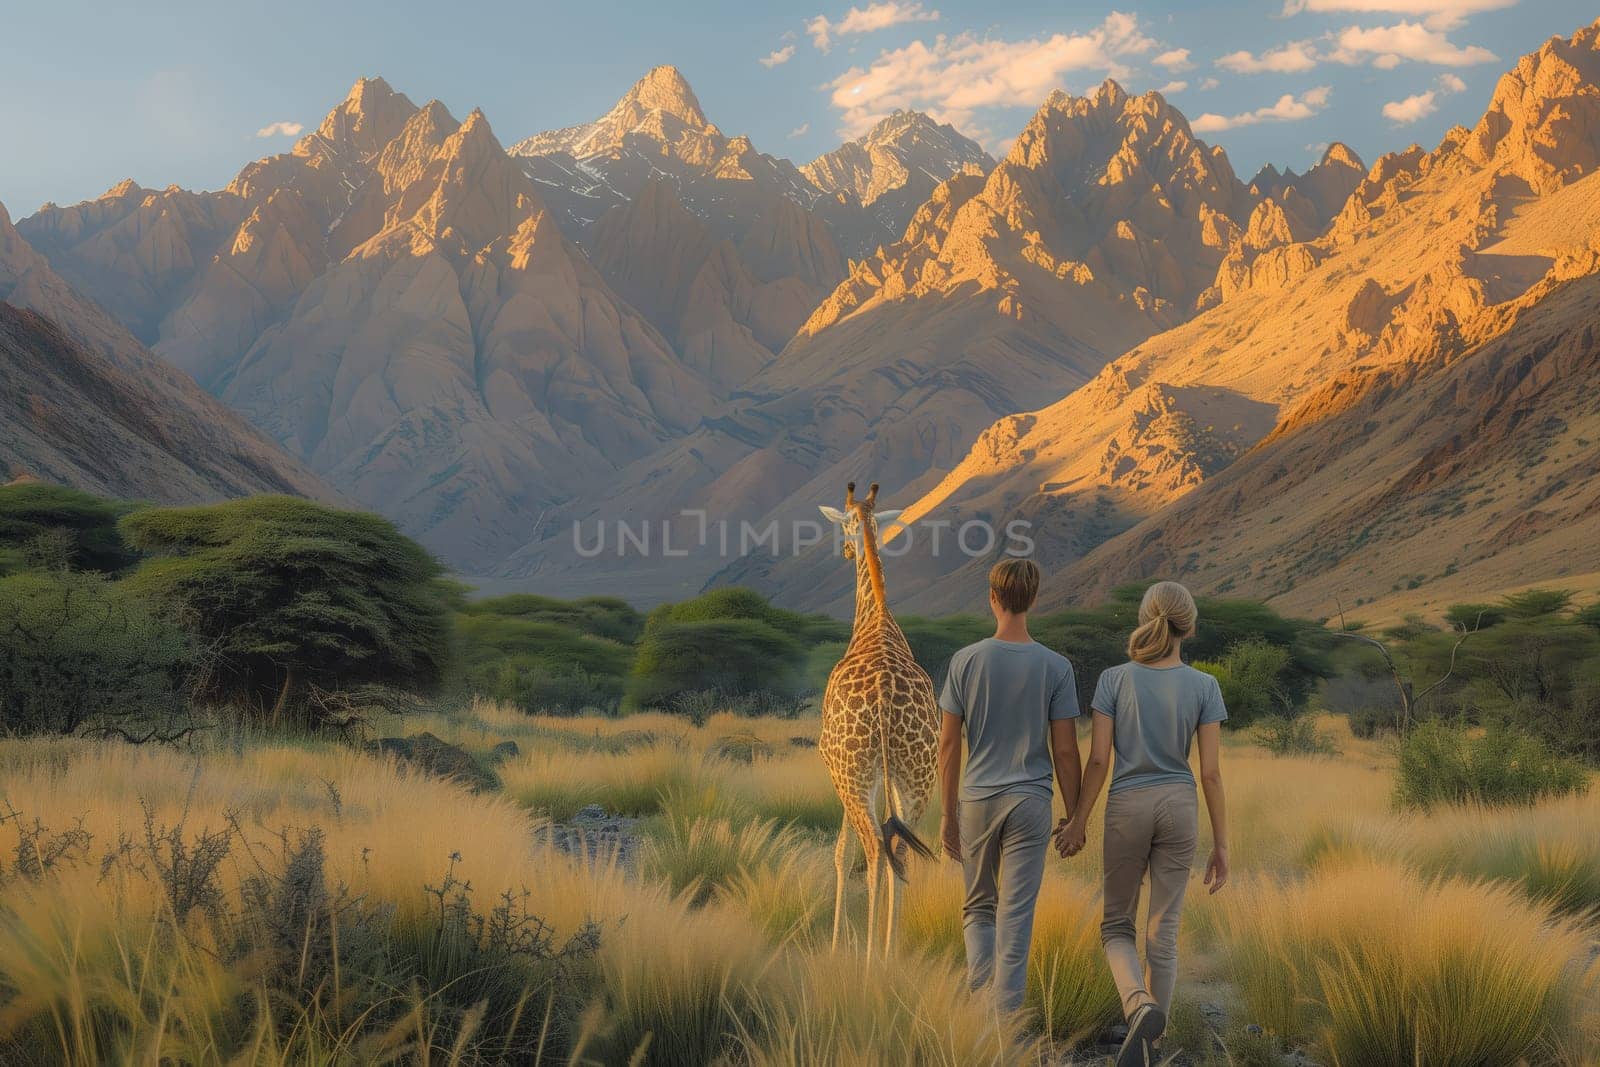 A man and a woman are strolling through a grassy field surrounded by towering mountains and graceful giraffes. The natural landscape is serene, with fluffy clouds in the sky